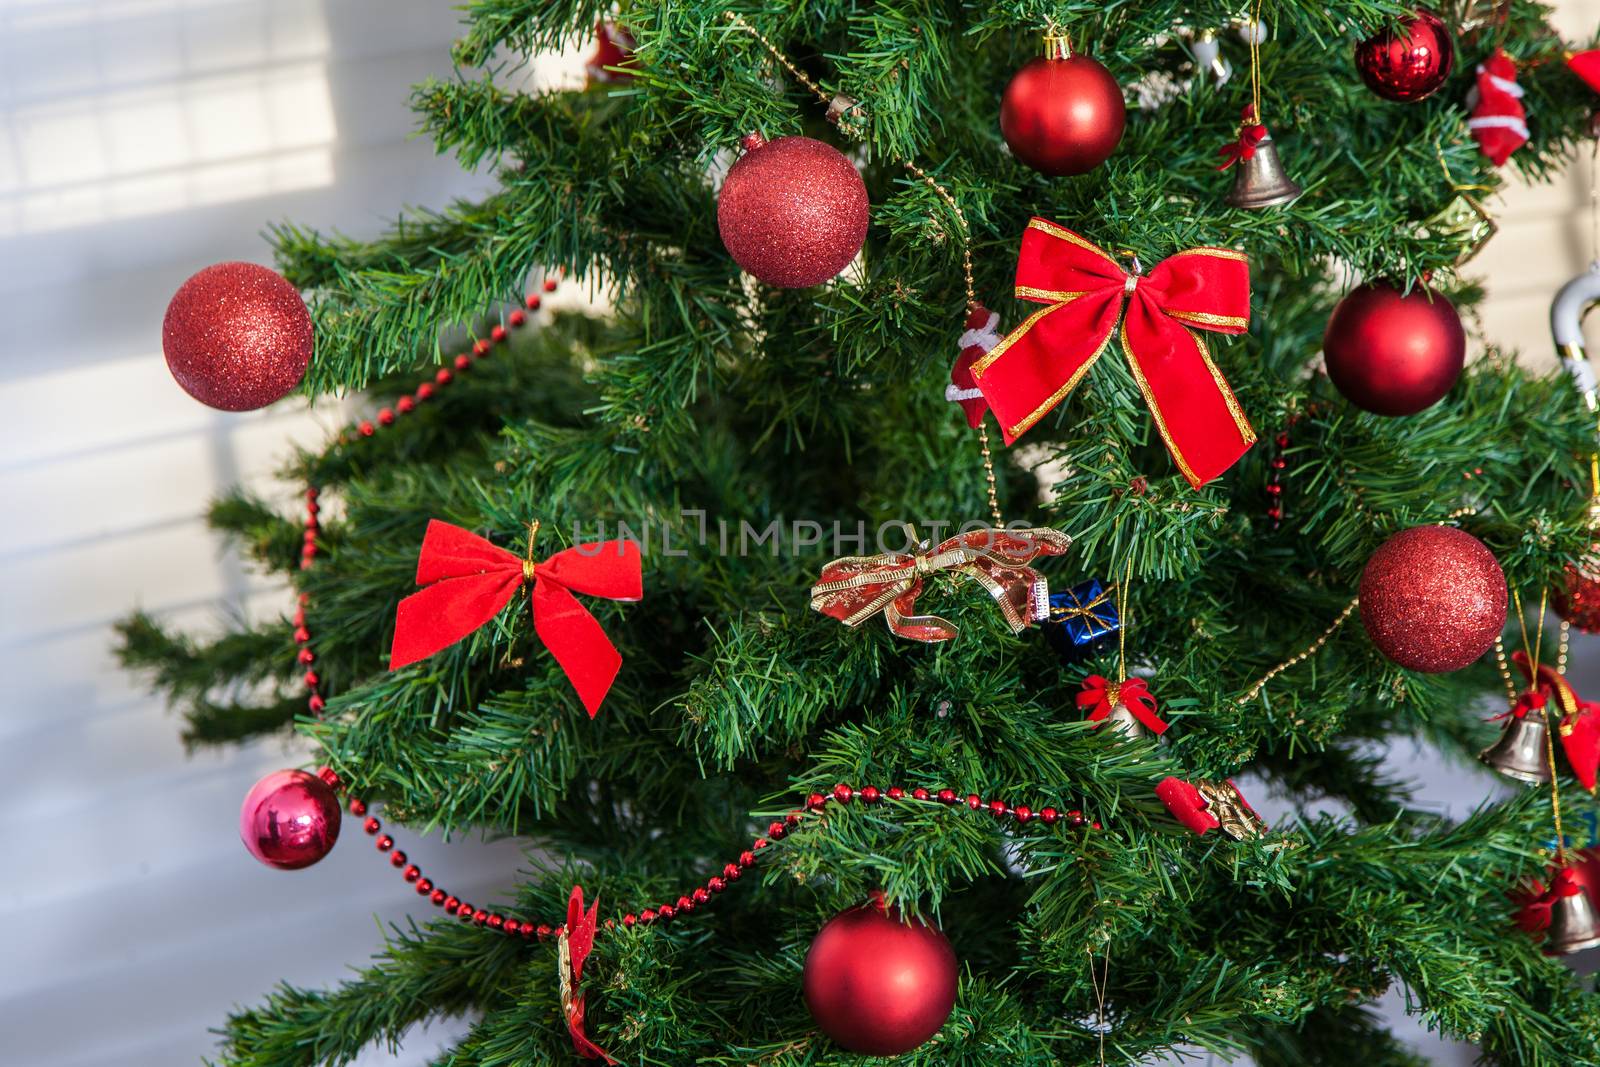 ball, bells, blue, branch, bun, celebration, ceremonial, christmas, cold, december, decorate, decorating, decoration, elegant, festive, festivity, fete, fir, gift, green, holiday, holidays, home, horizontal, model, nativity, nobody, peaceful, present, property, red, release, room, still, tradition, tree, white, winter, woods, xmas, balls